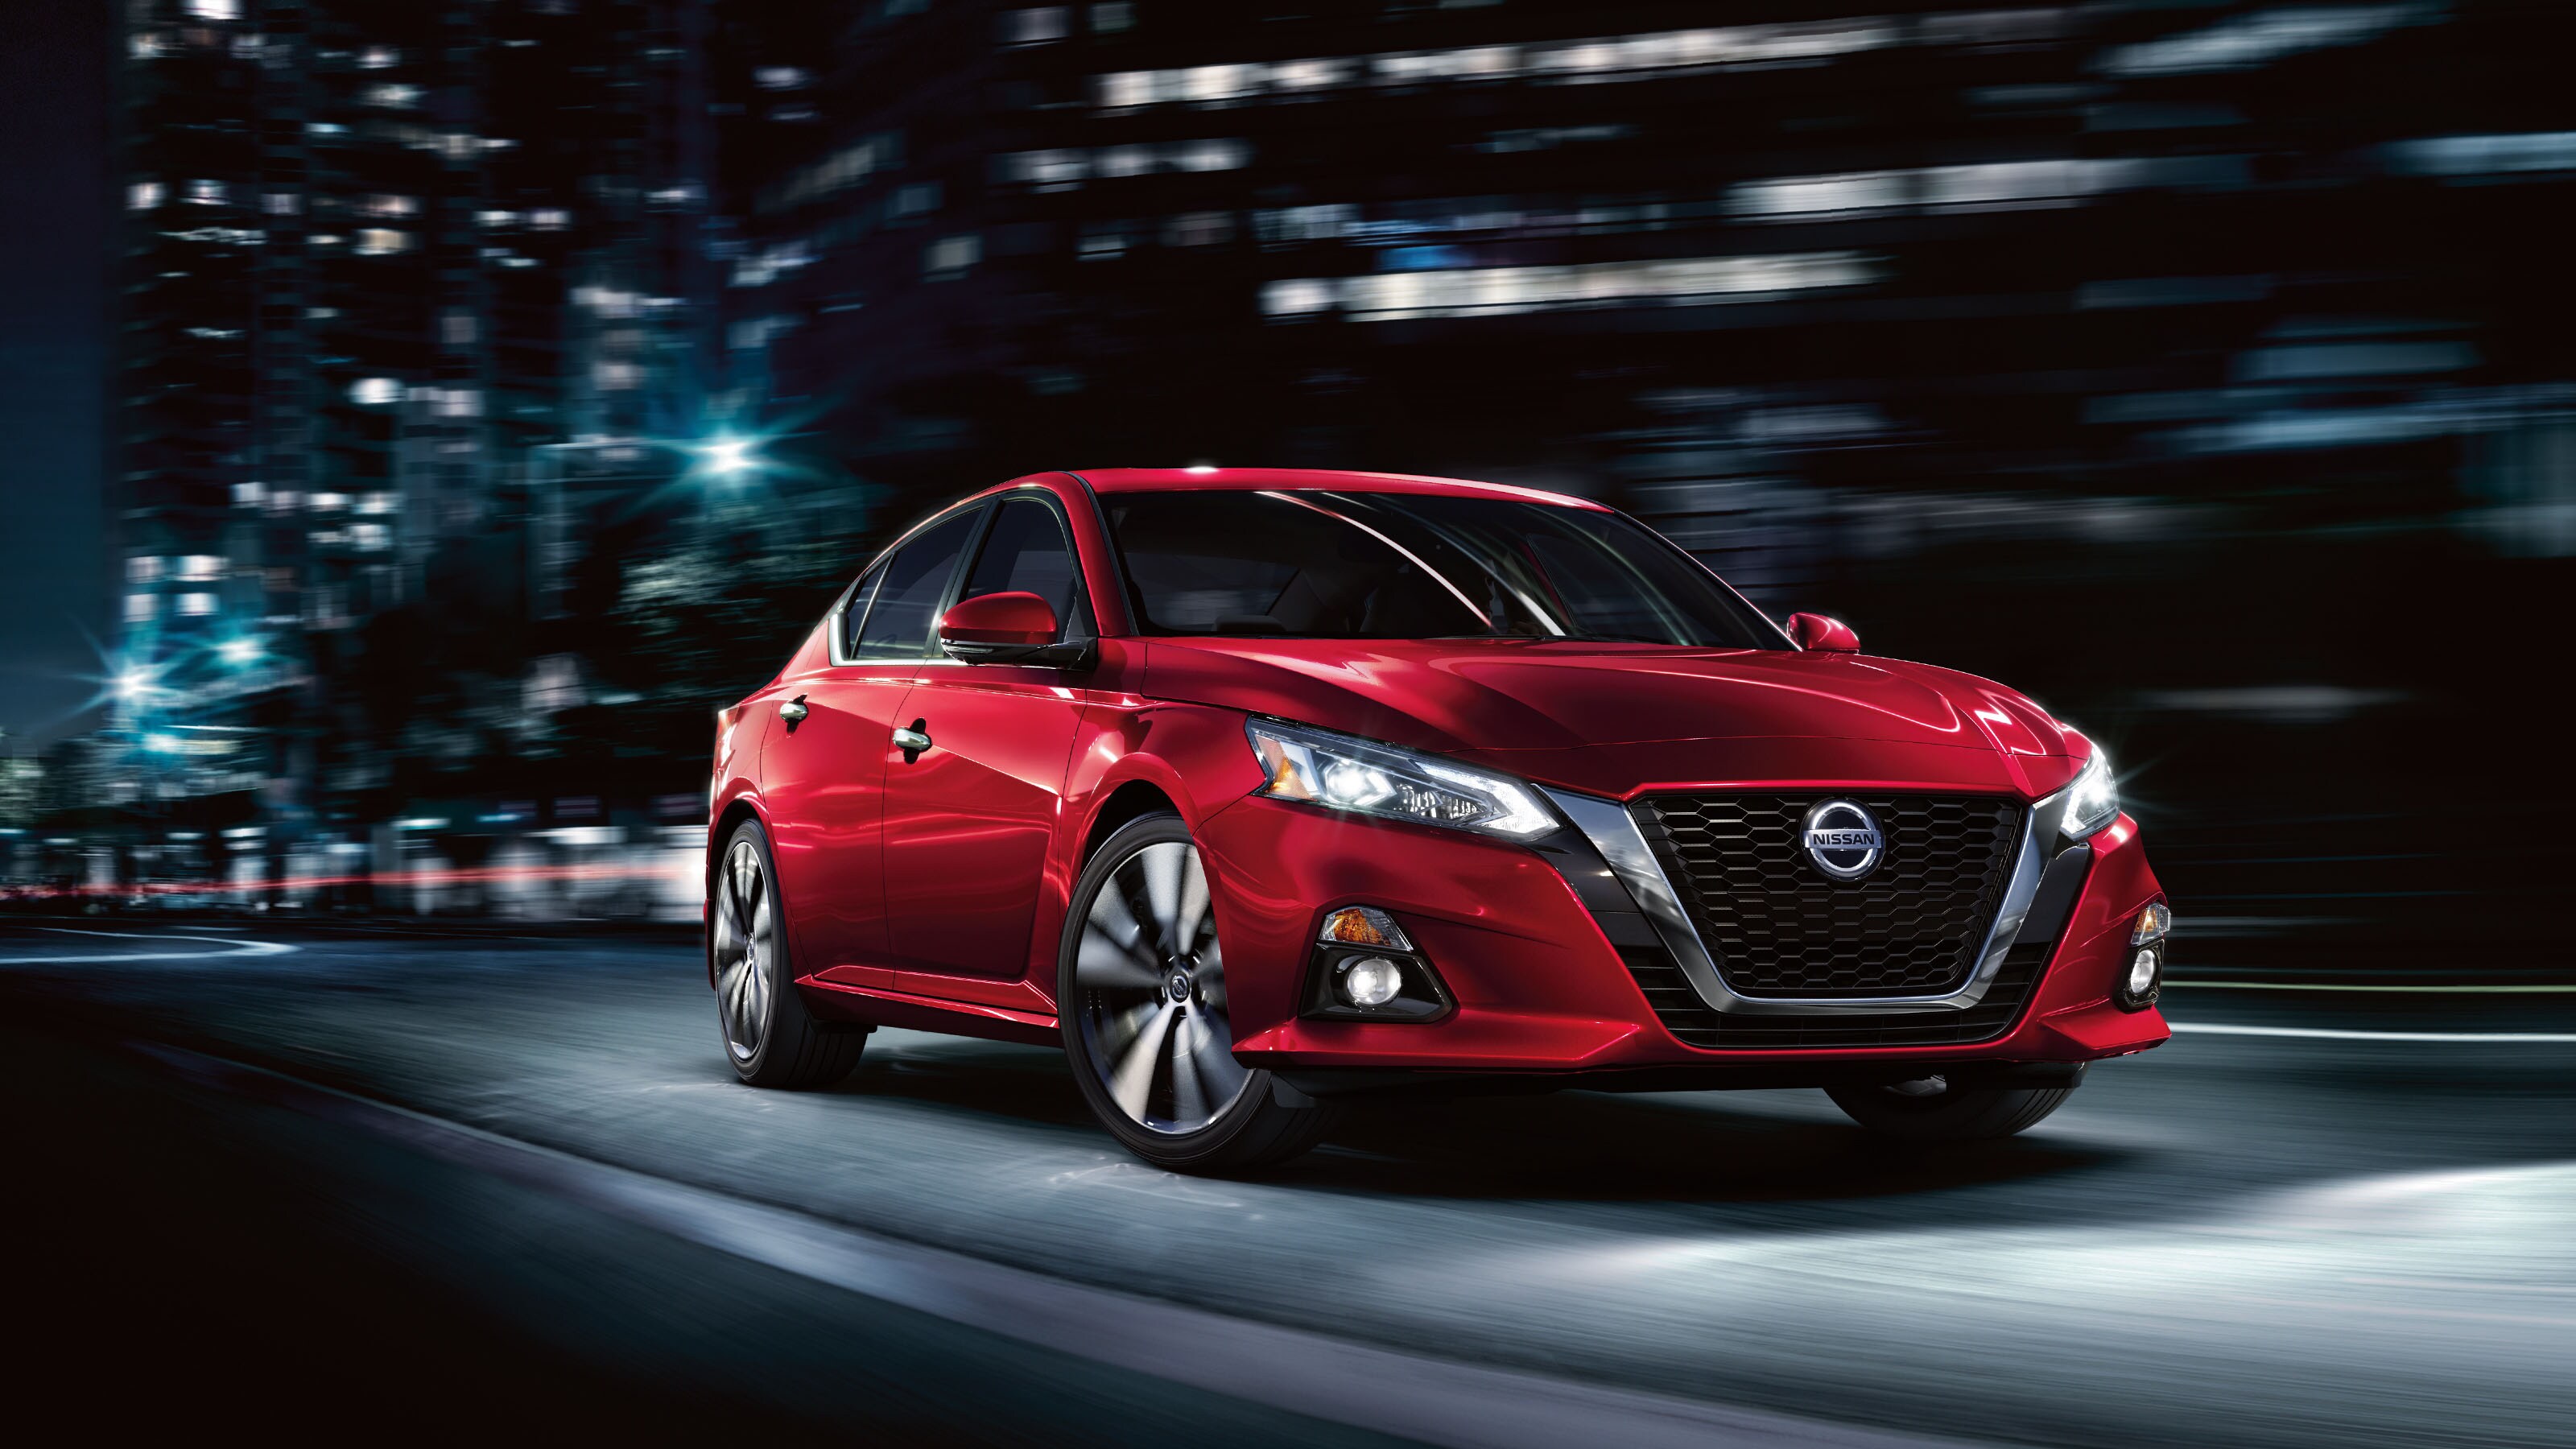 2019 Nissan Altima driving on the road